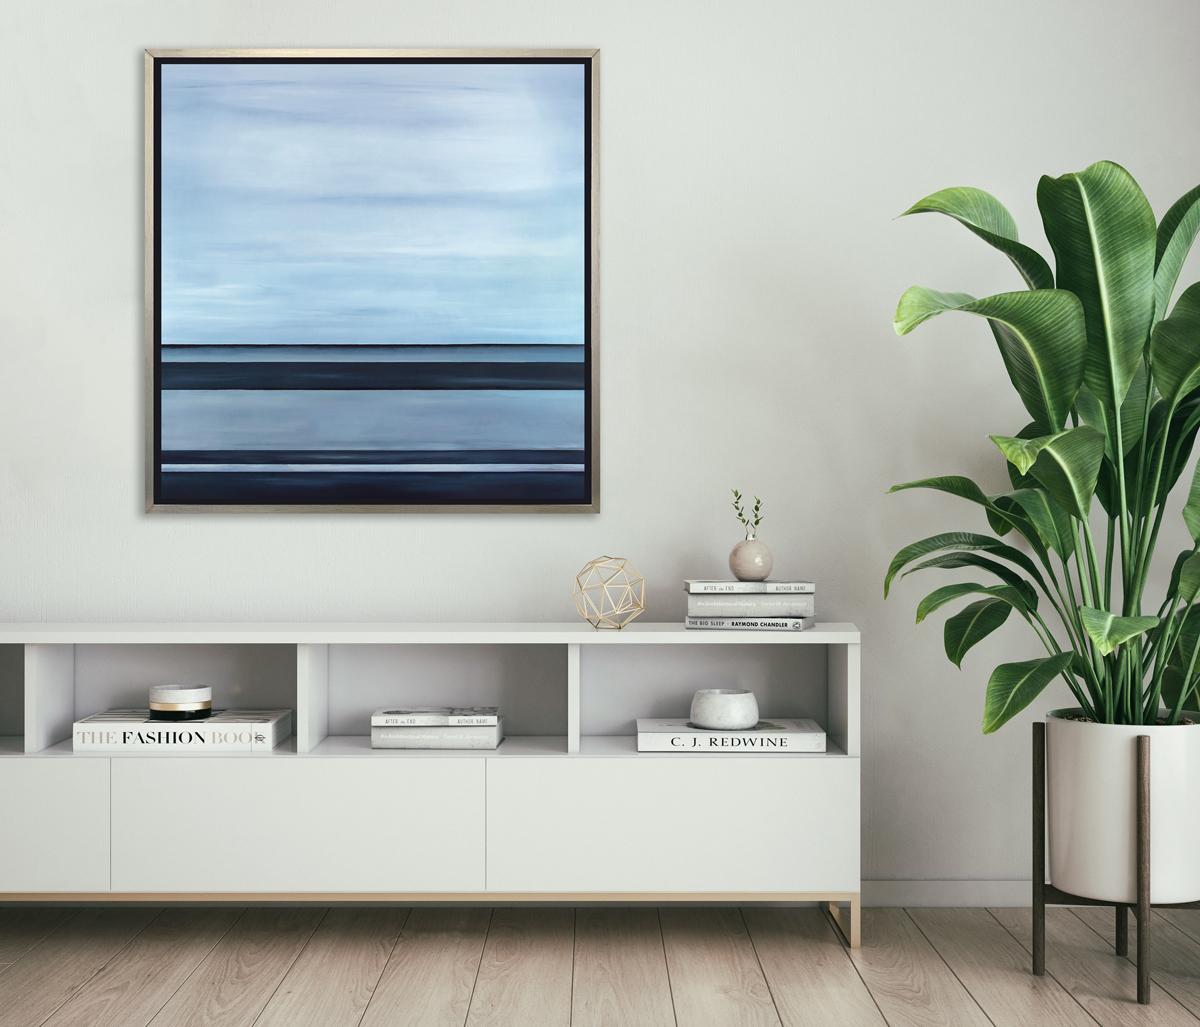 This abstract landscape limited edition print by Tony Iadicicco features a blue and grey palette. The artist pairs soft blended color with stark horizontal lines which create a landscape composition and coastal aesthetic. 

This Limited Edition